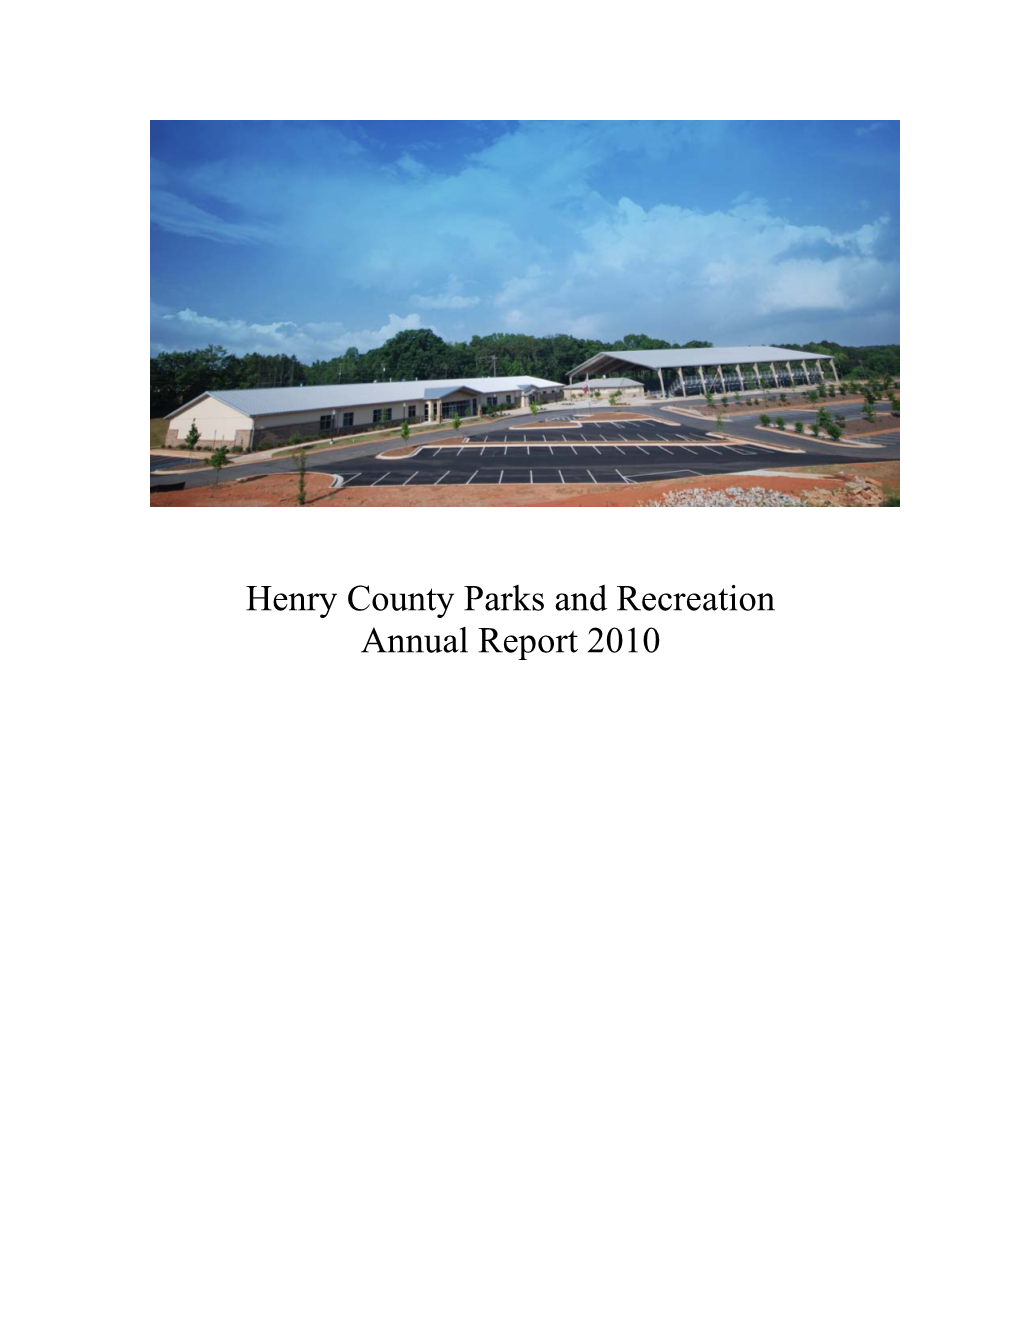 Henry County Parks and Recreation Annual Report 2010